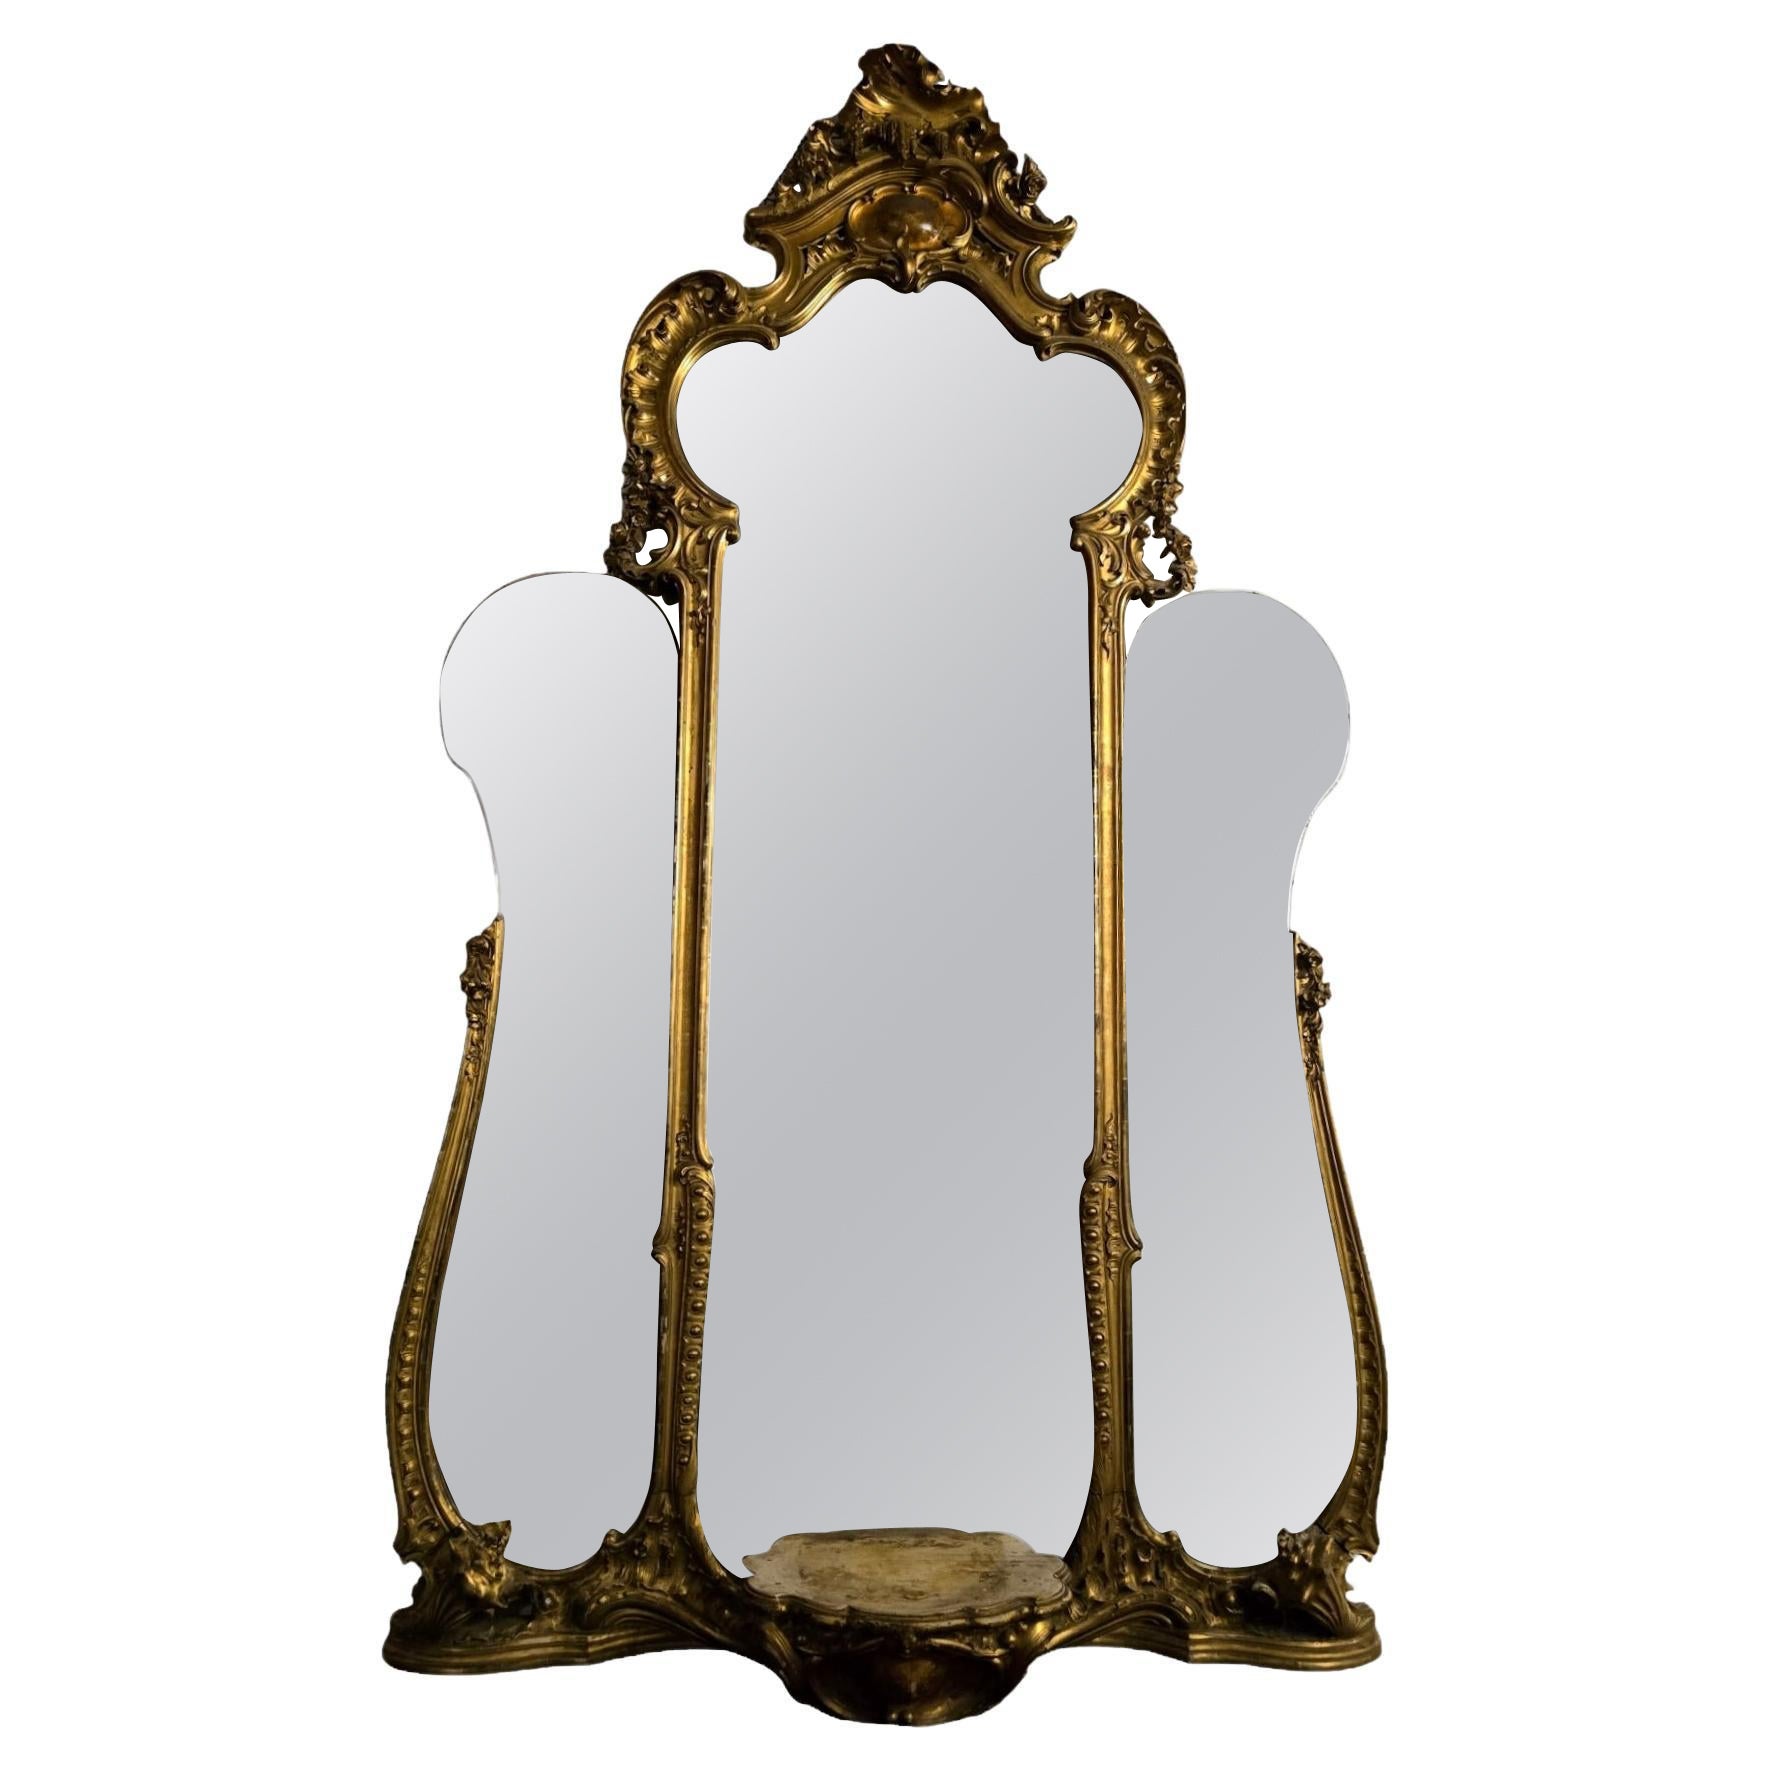 Monumental French Gilded Wood Mirror - A Historical Masterpiece of Luxury